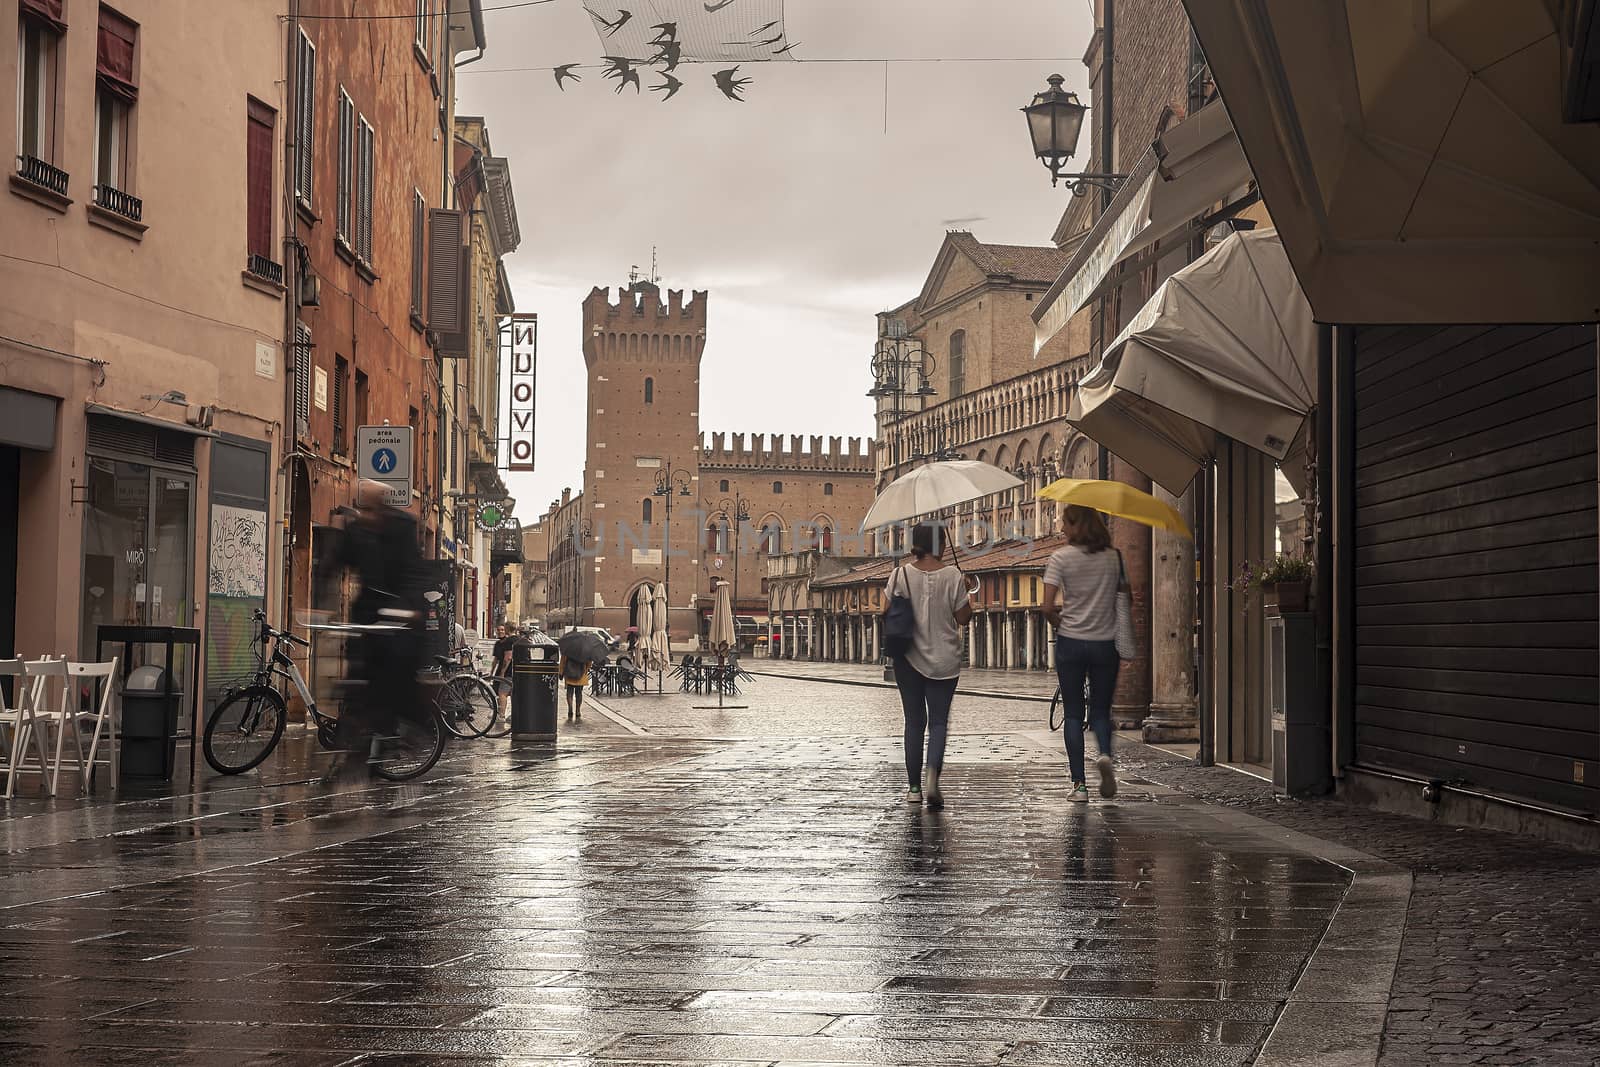 Evocative view of the street that leads to Piazza Trento Trieste in Ferrara 8 by pippocarlot